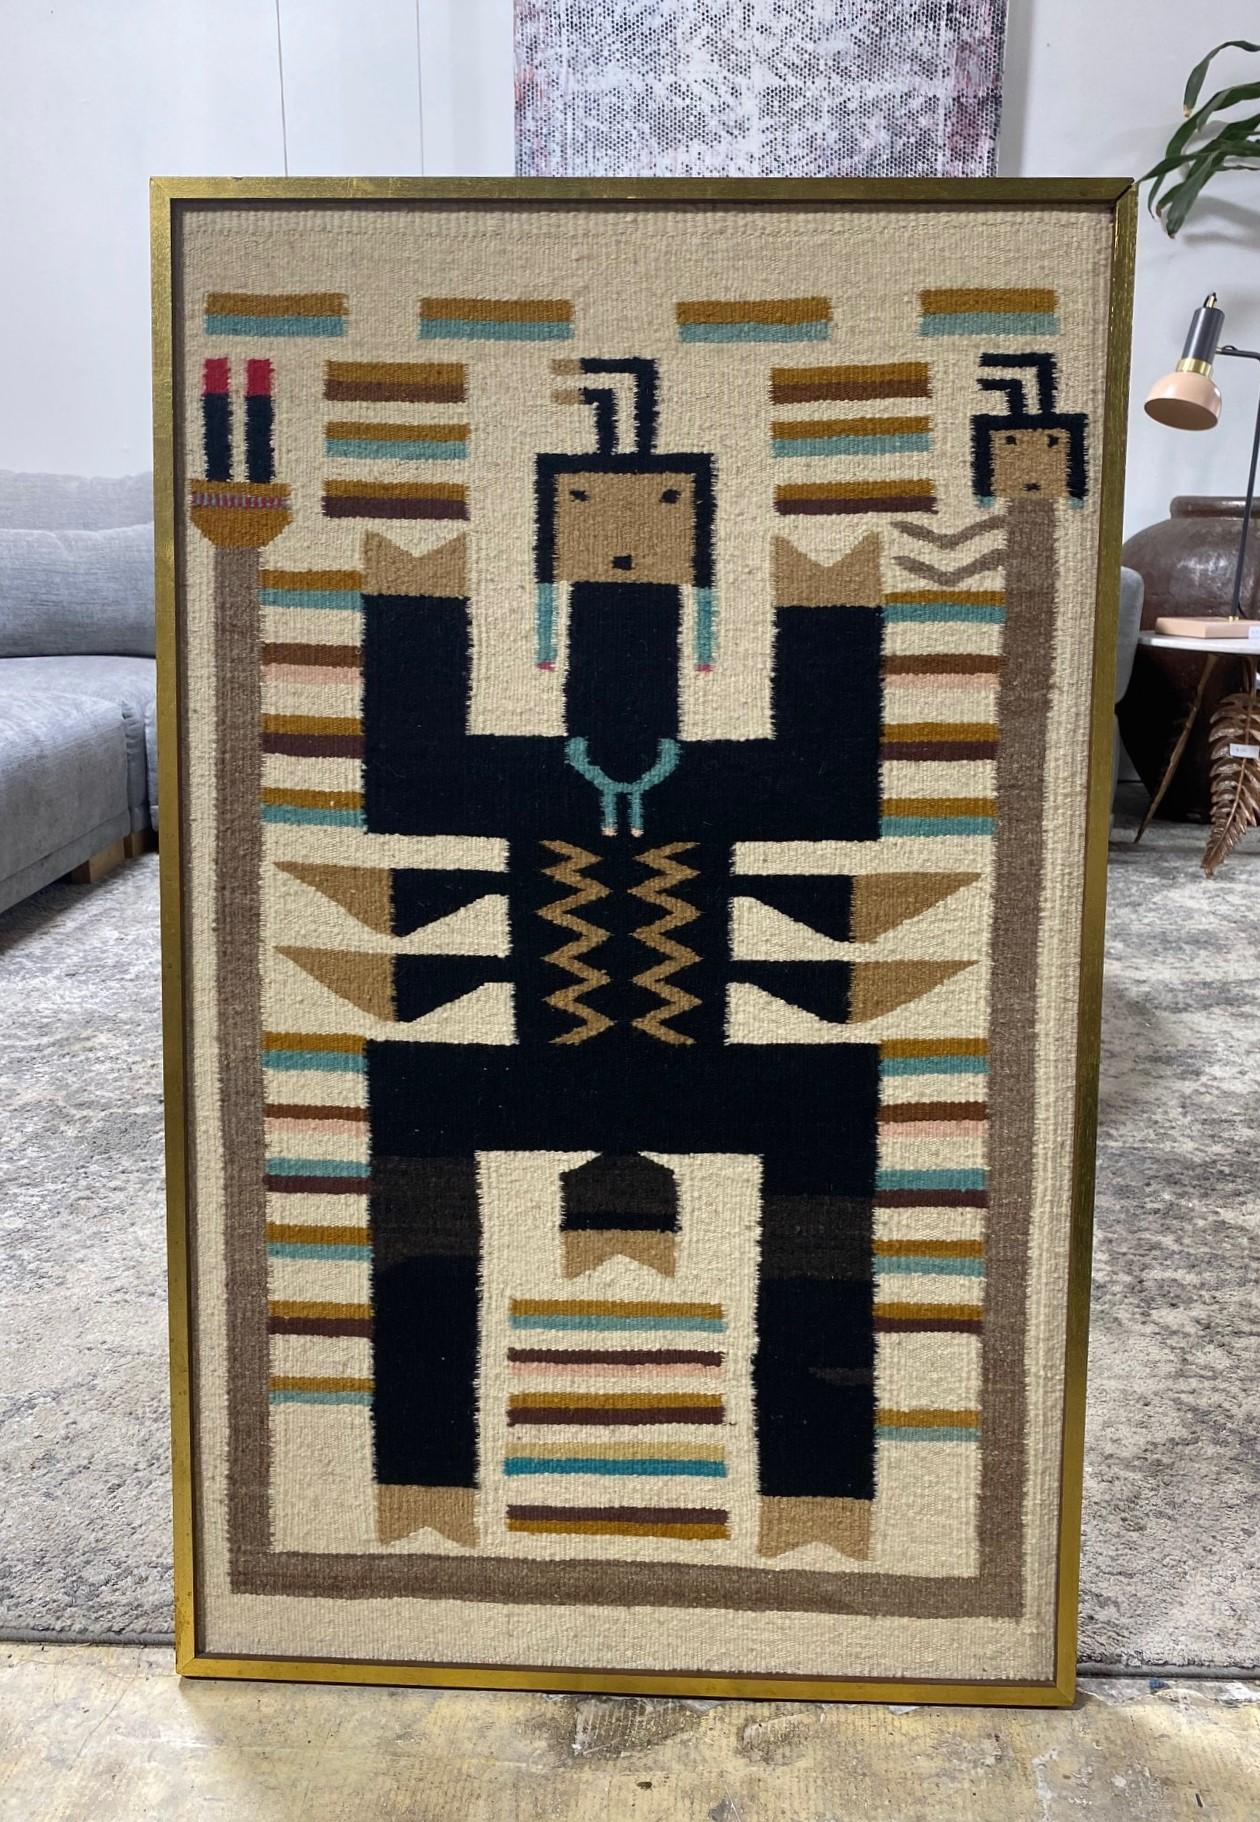 A beautifully composed and intricately woven Navajo Yei pictorial rug/blanket featuring a Navajo dancer portraying a Yei (Yeibichai) character. Yei is the Navajo name for benevolent, holy beings who possess supernatural healing powers. 

This work